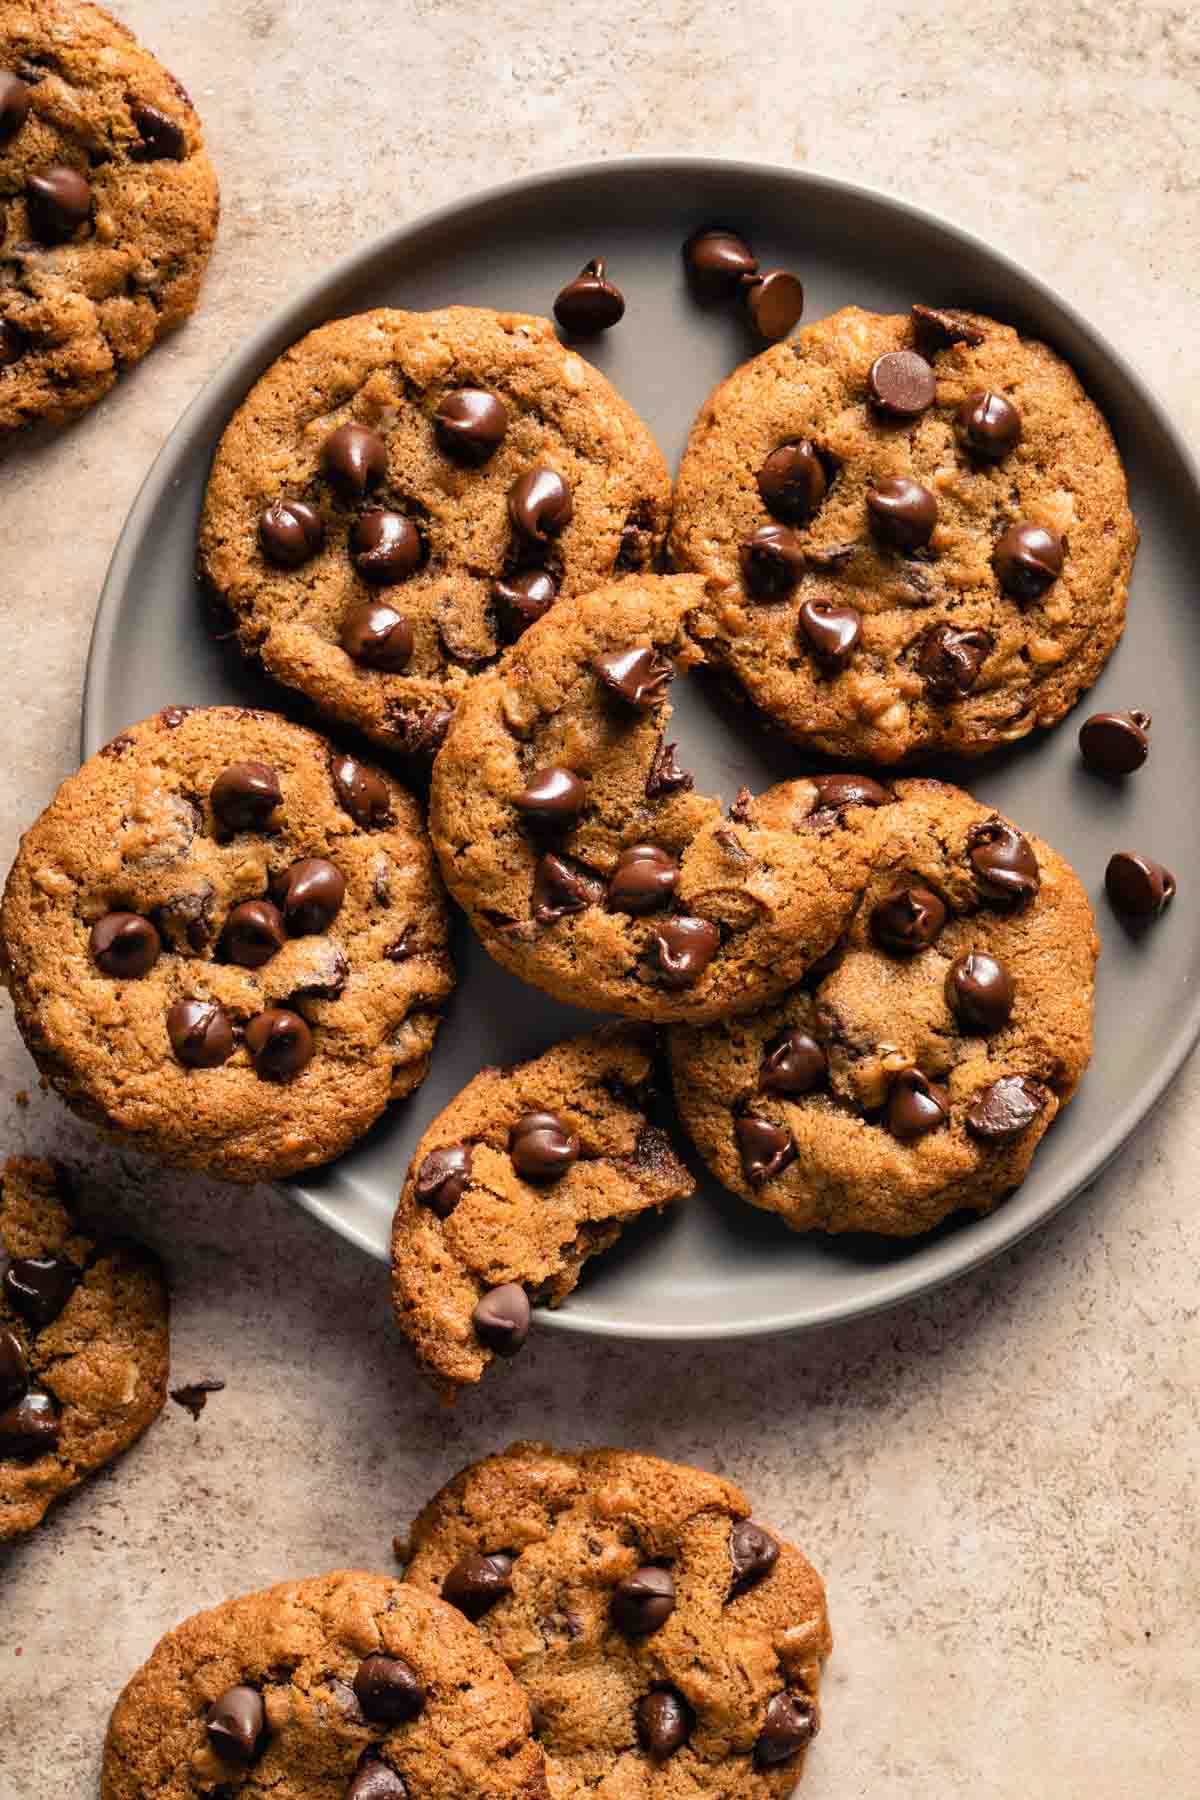 Air fried chocolate chip cookies arranged on a plate.